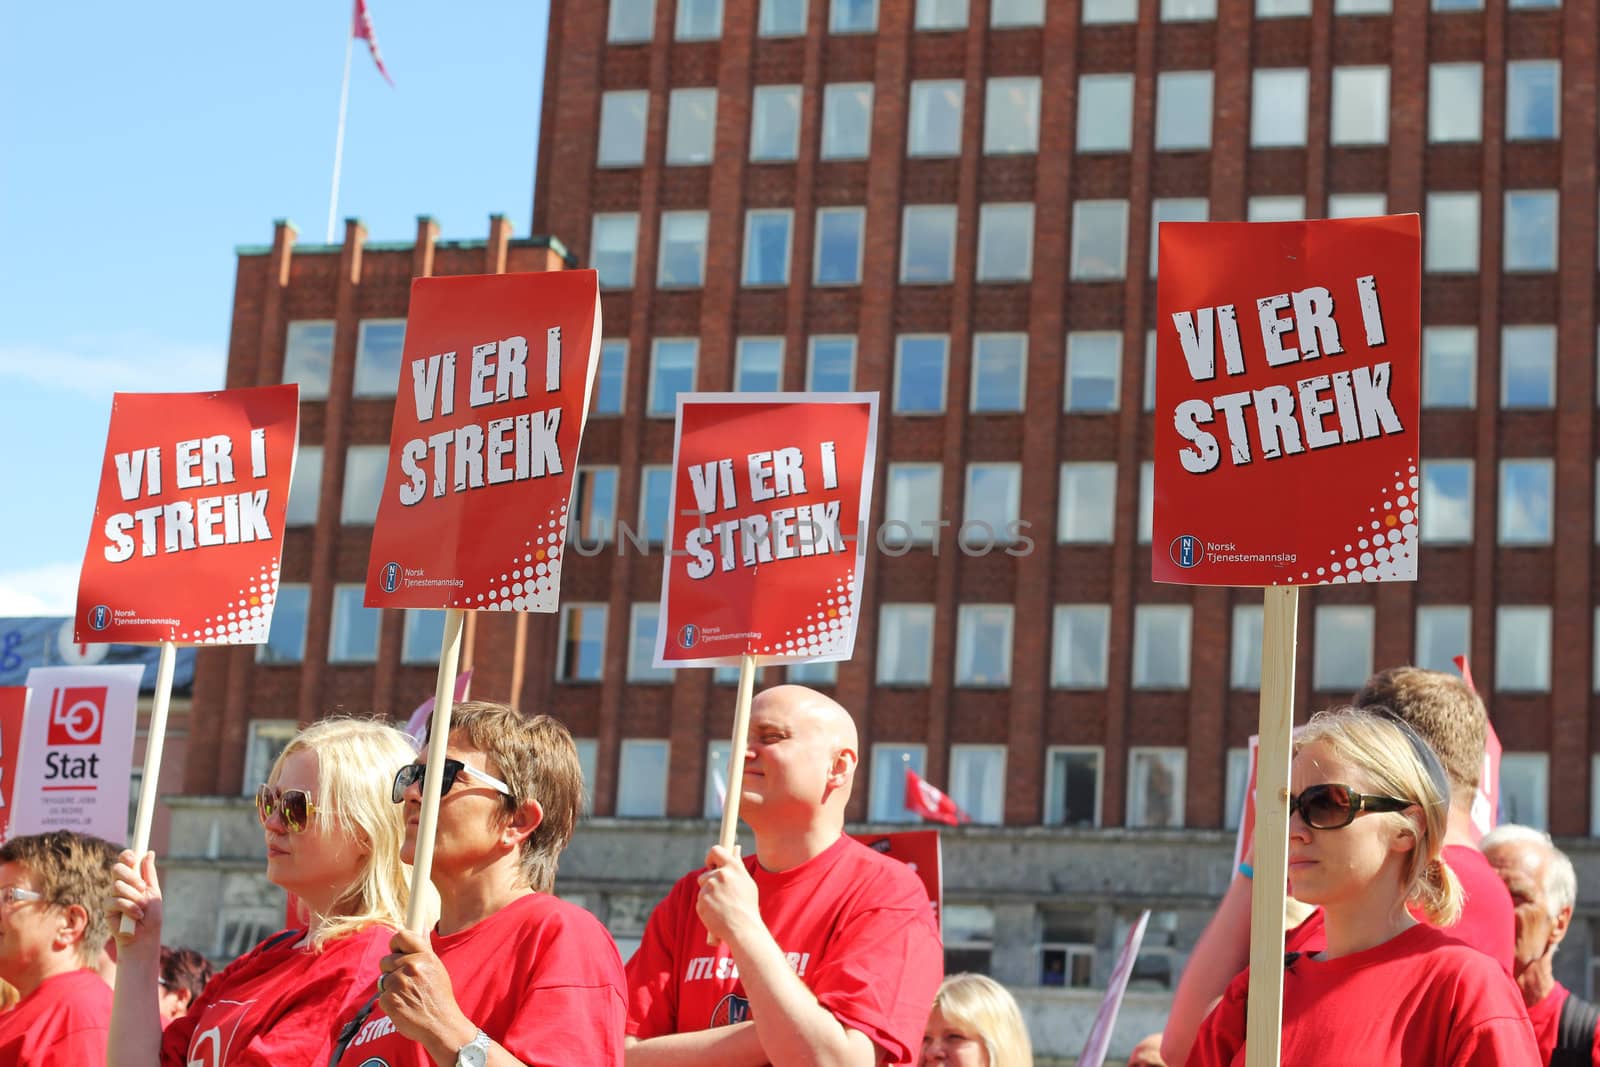 Public sector workers are on strike and protest in Oslo 30.05.2012.